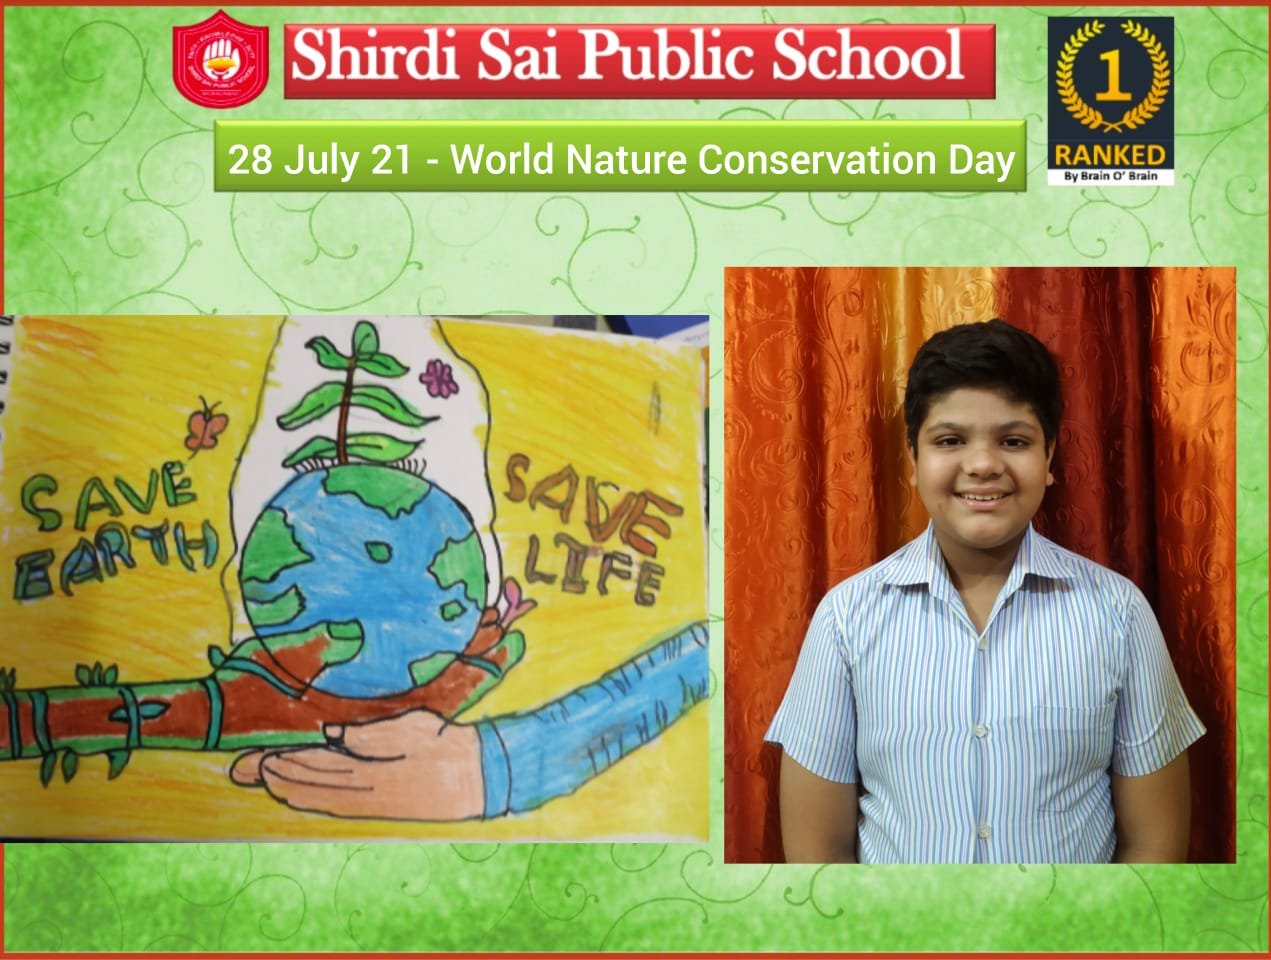 World nature conservation day – India NCC